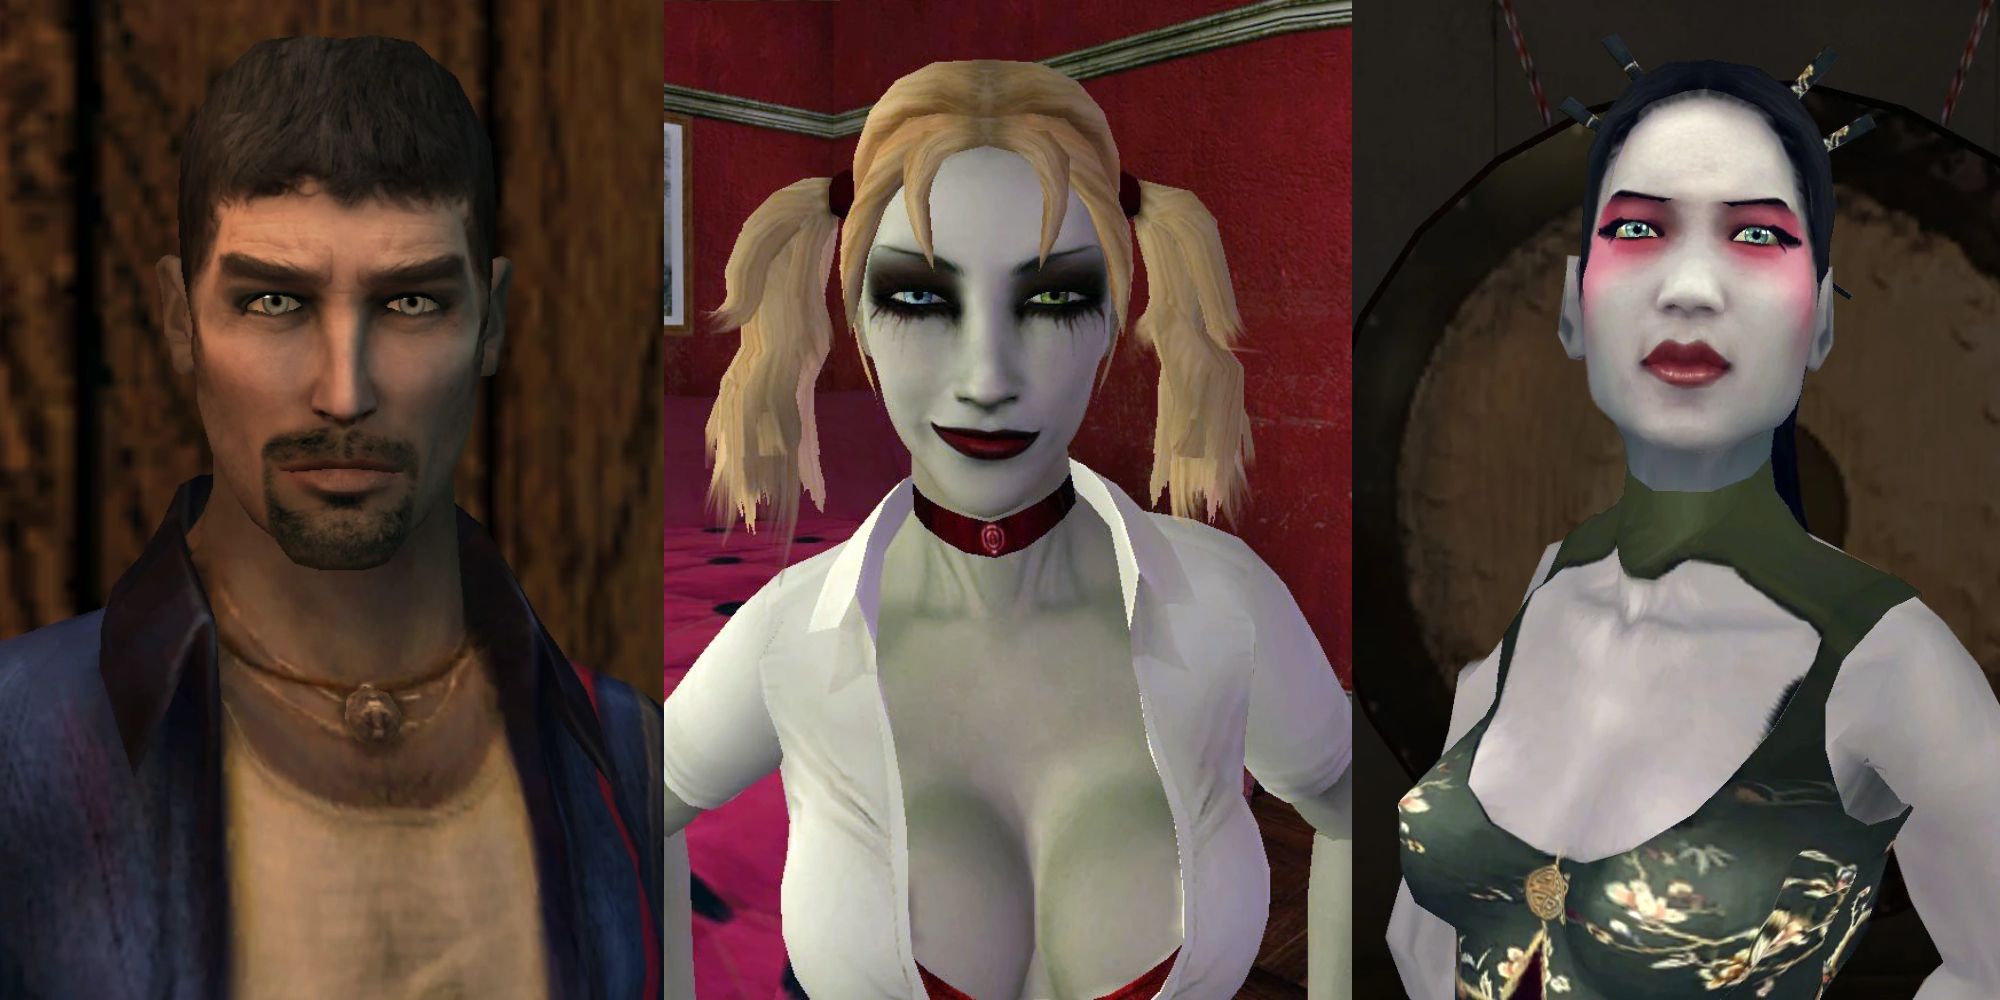 How to have the best Vampire: The Masquerade – Bloodlines experience today